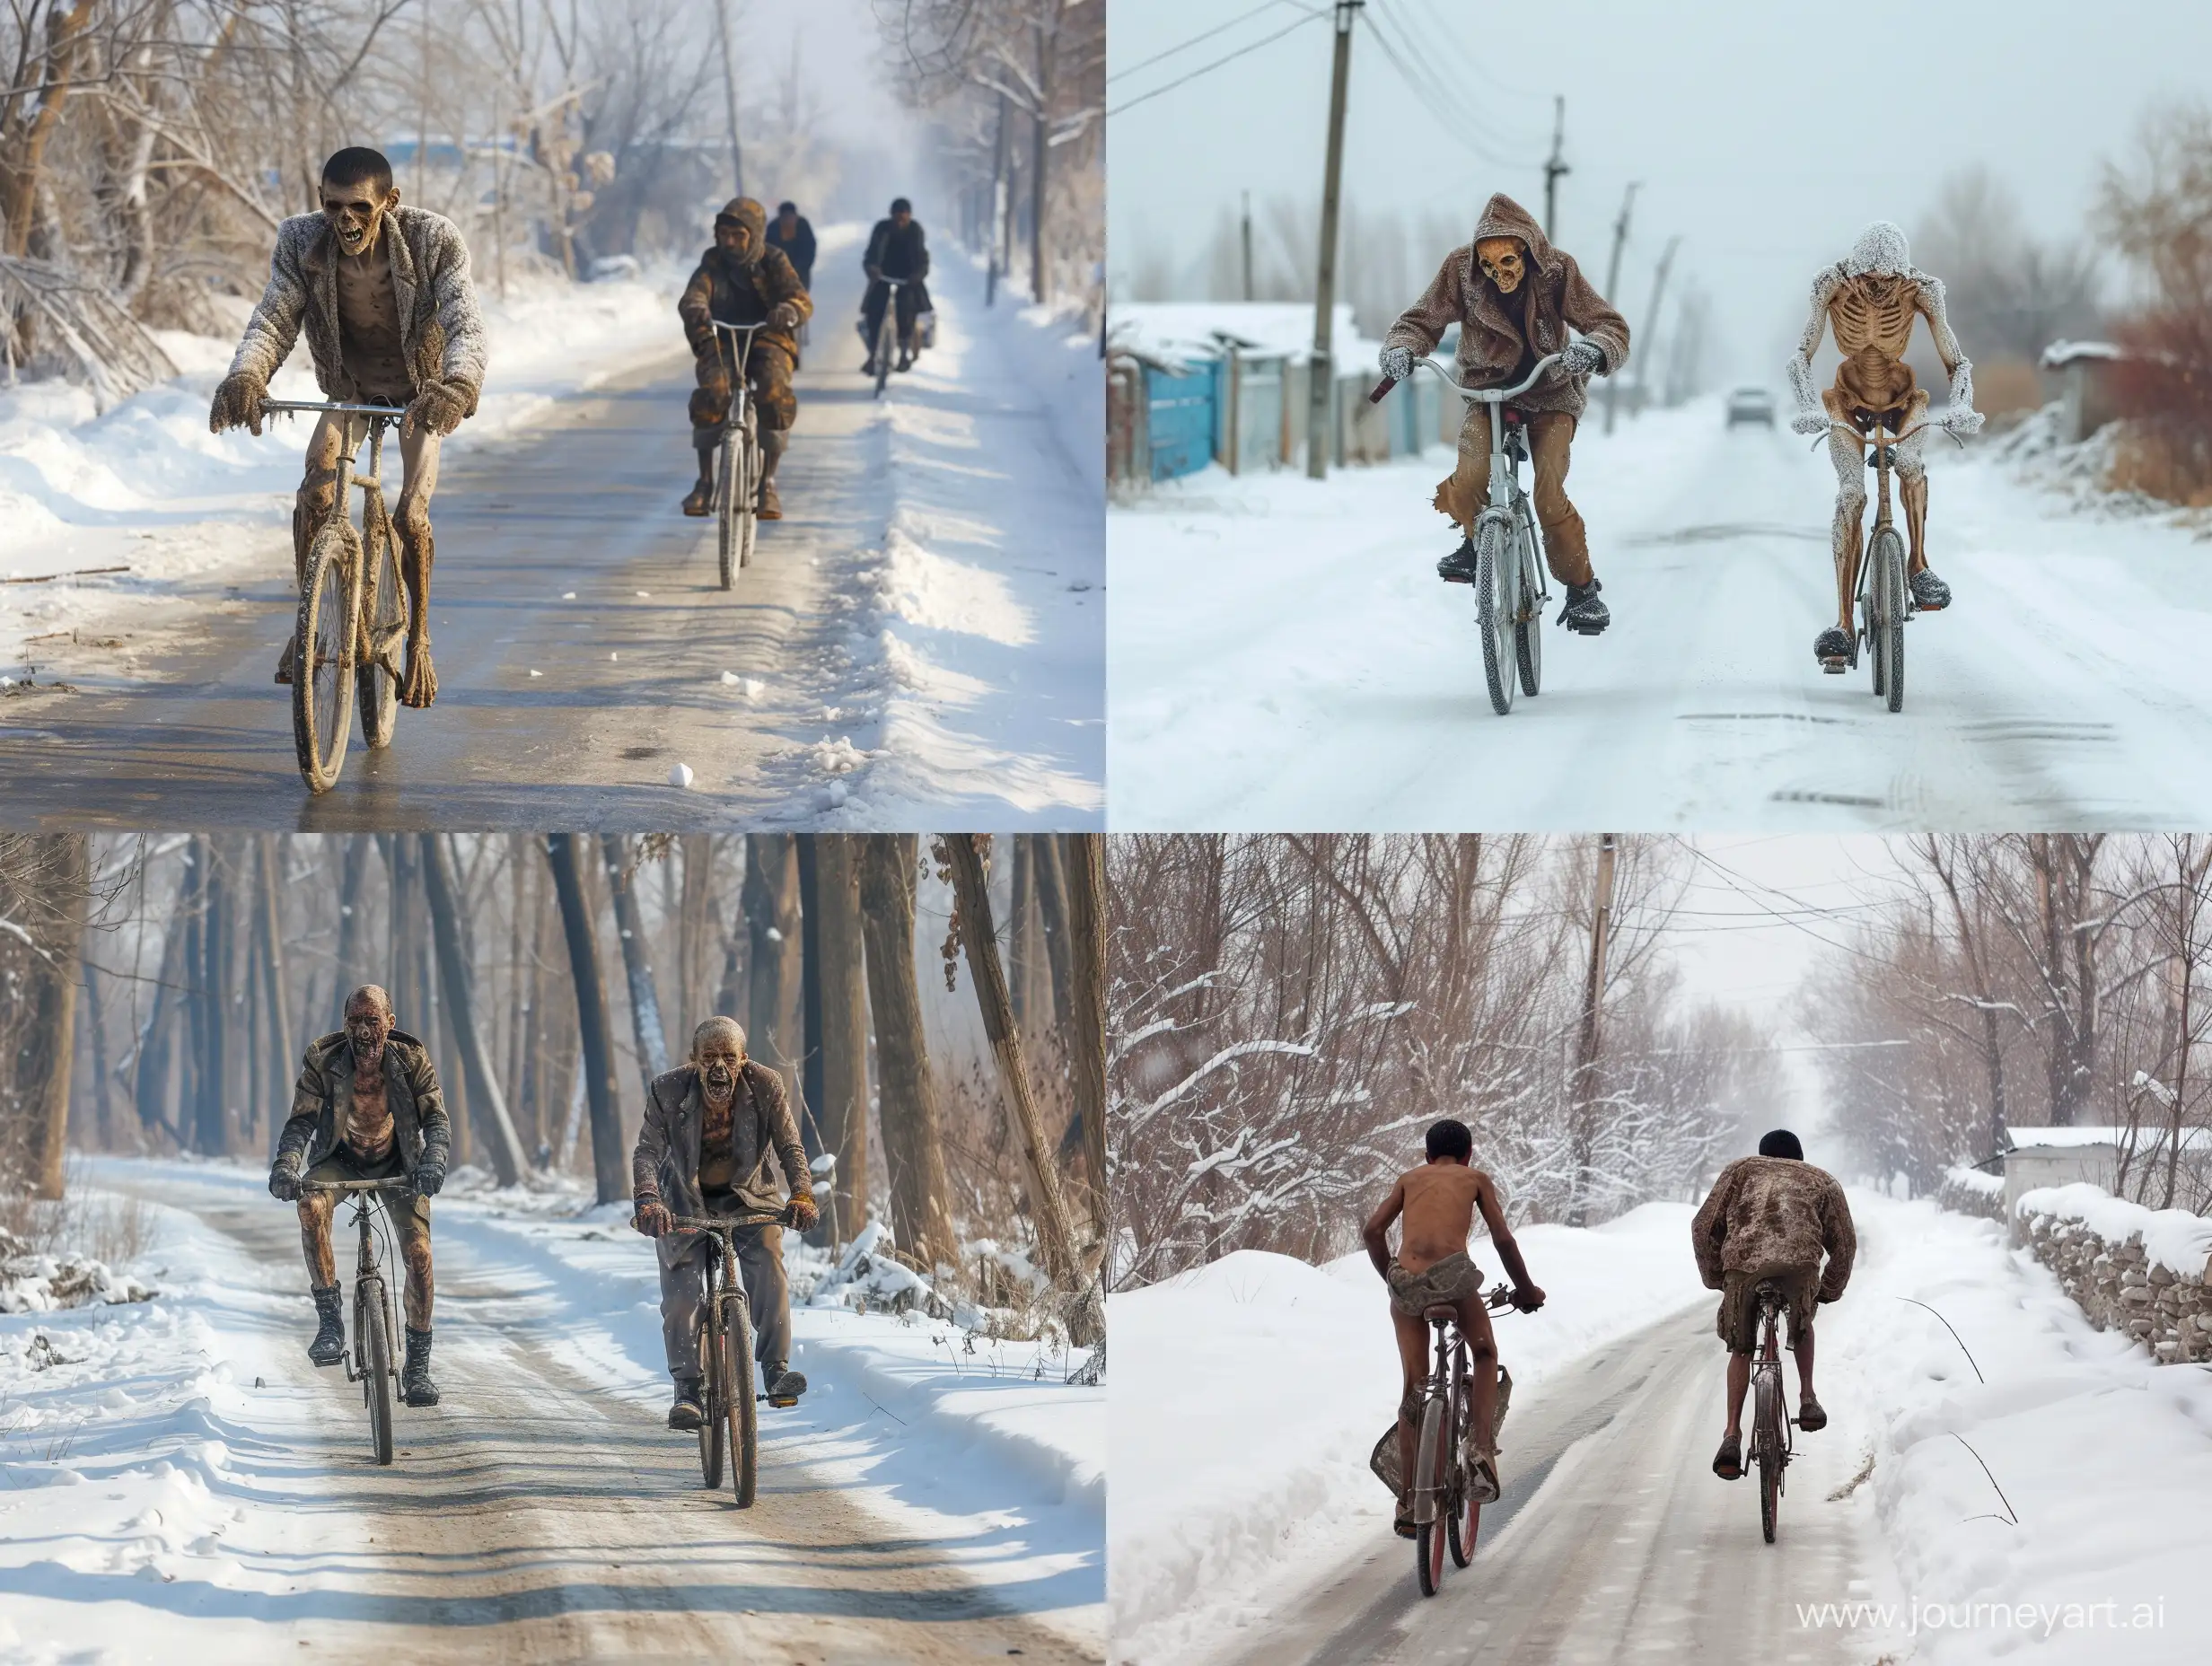 thin, emaciated people, riding bicycle in winter --v 6 --ar 4:3 --no 51043